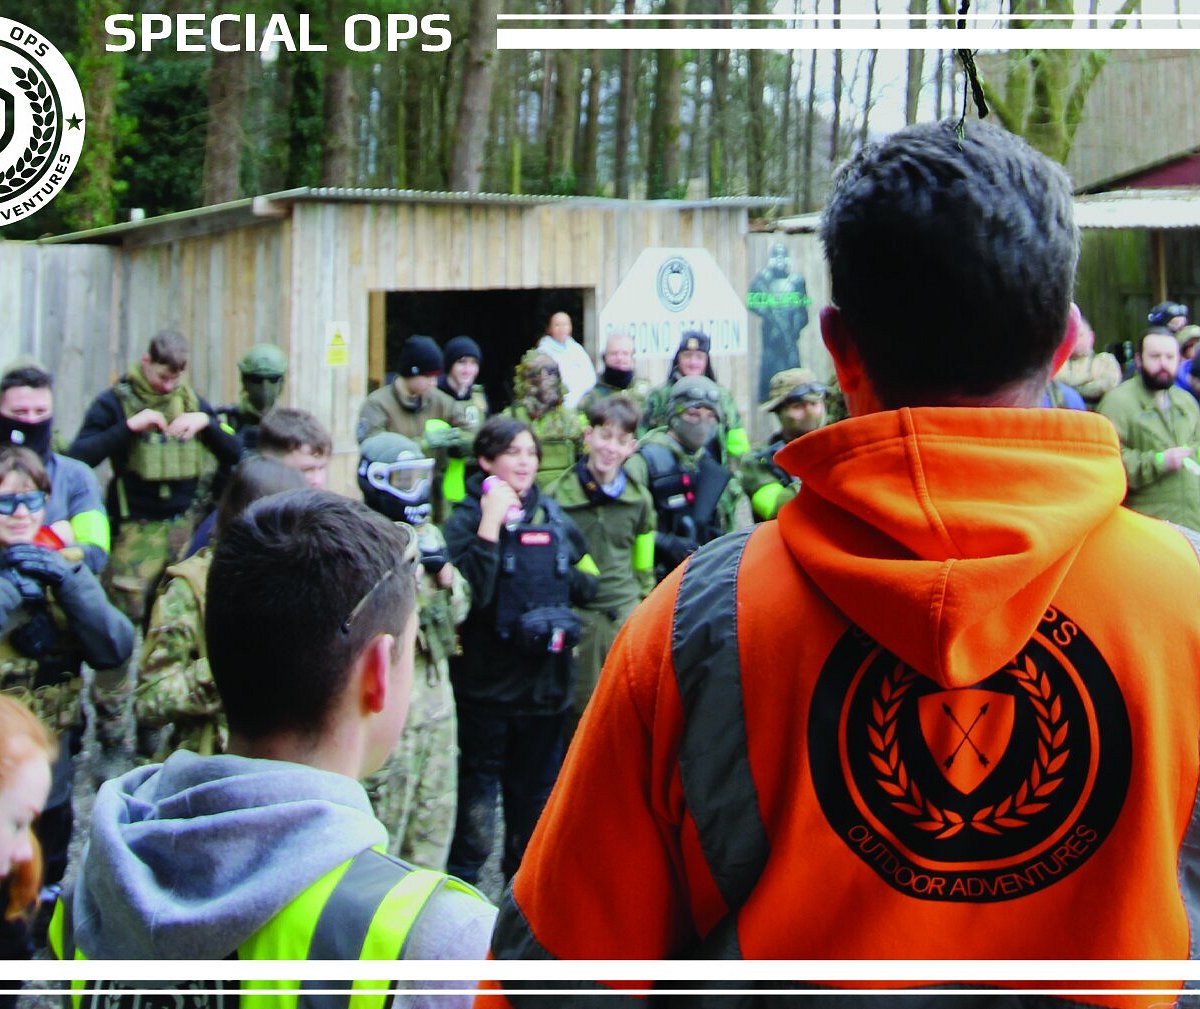 Play Airsoft in Dublin Today - Special Ops Adventures